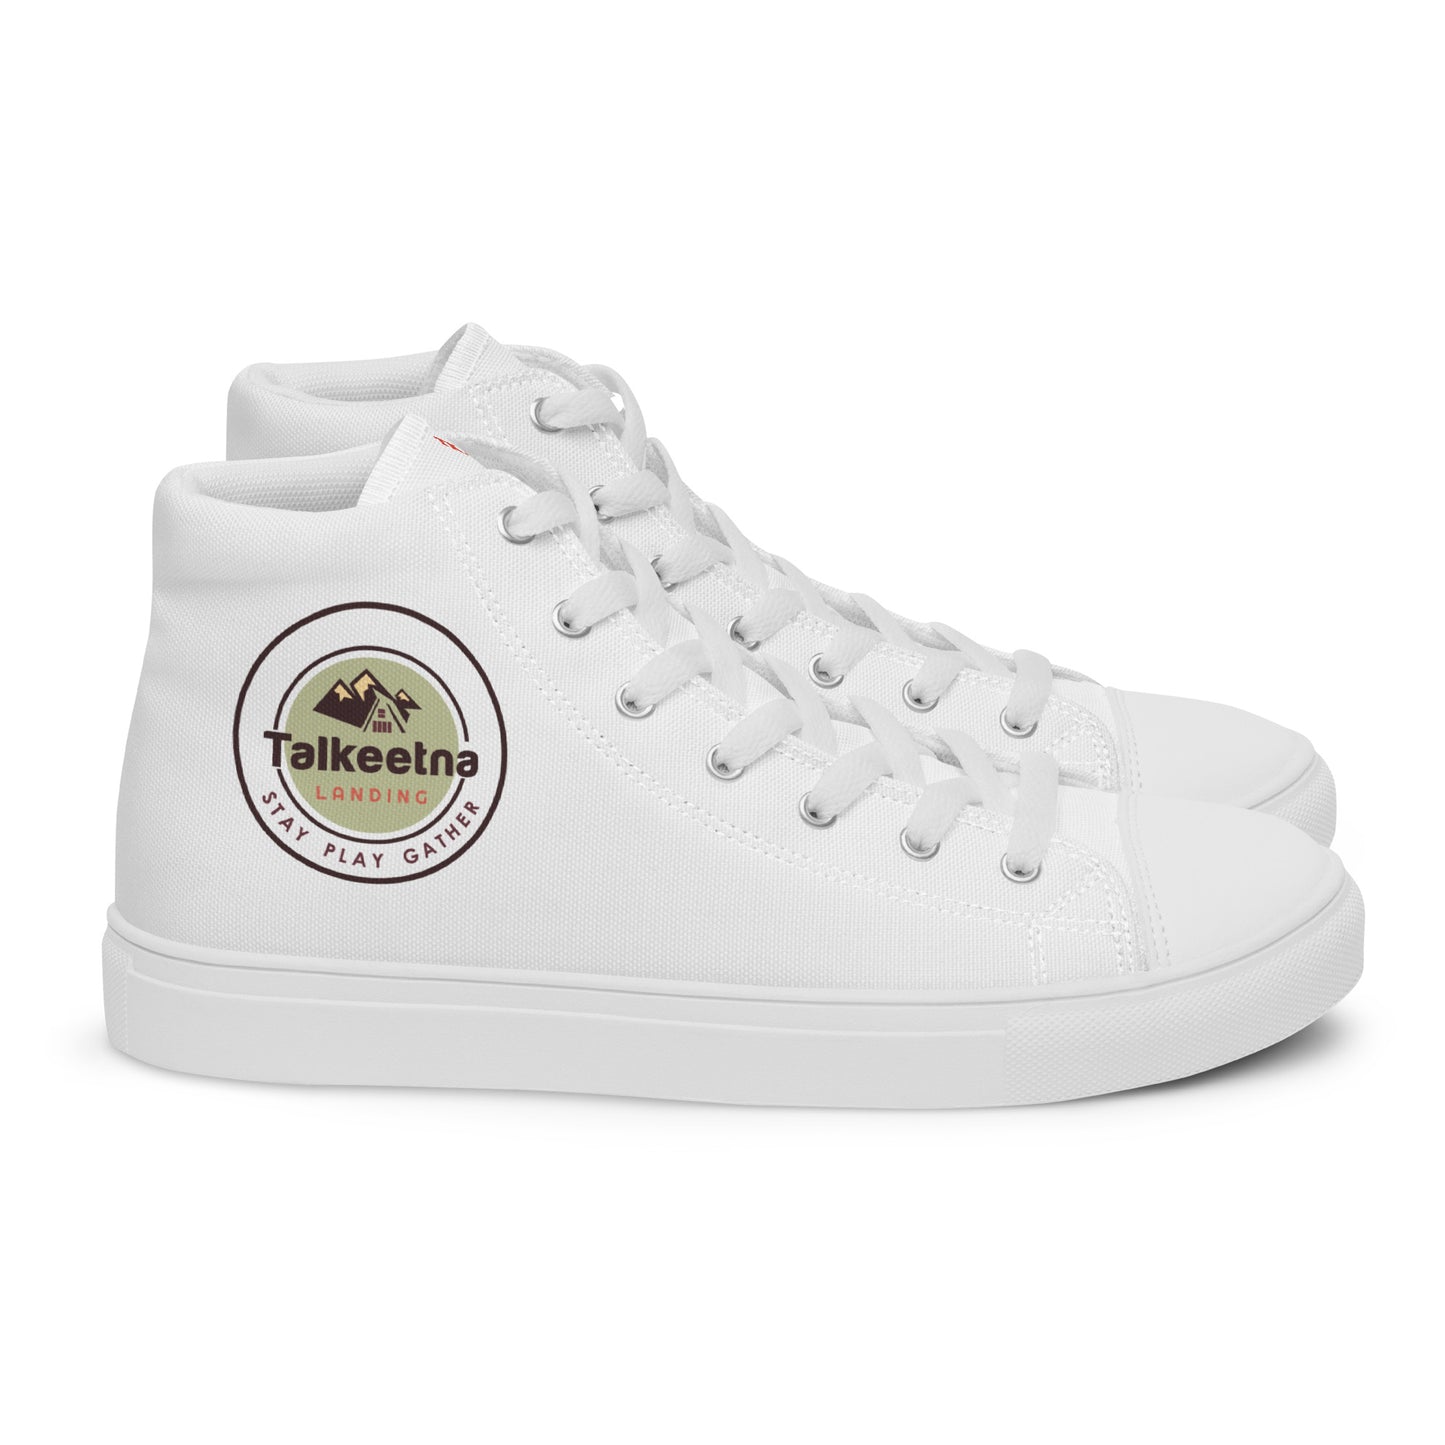 High Top IYKYK Canvas Shoes